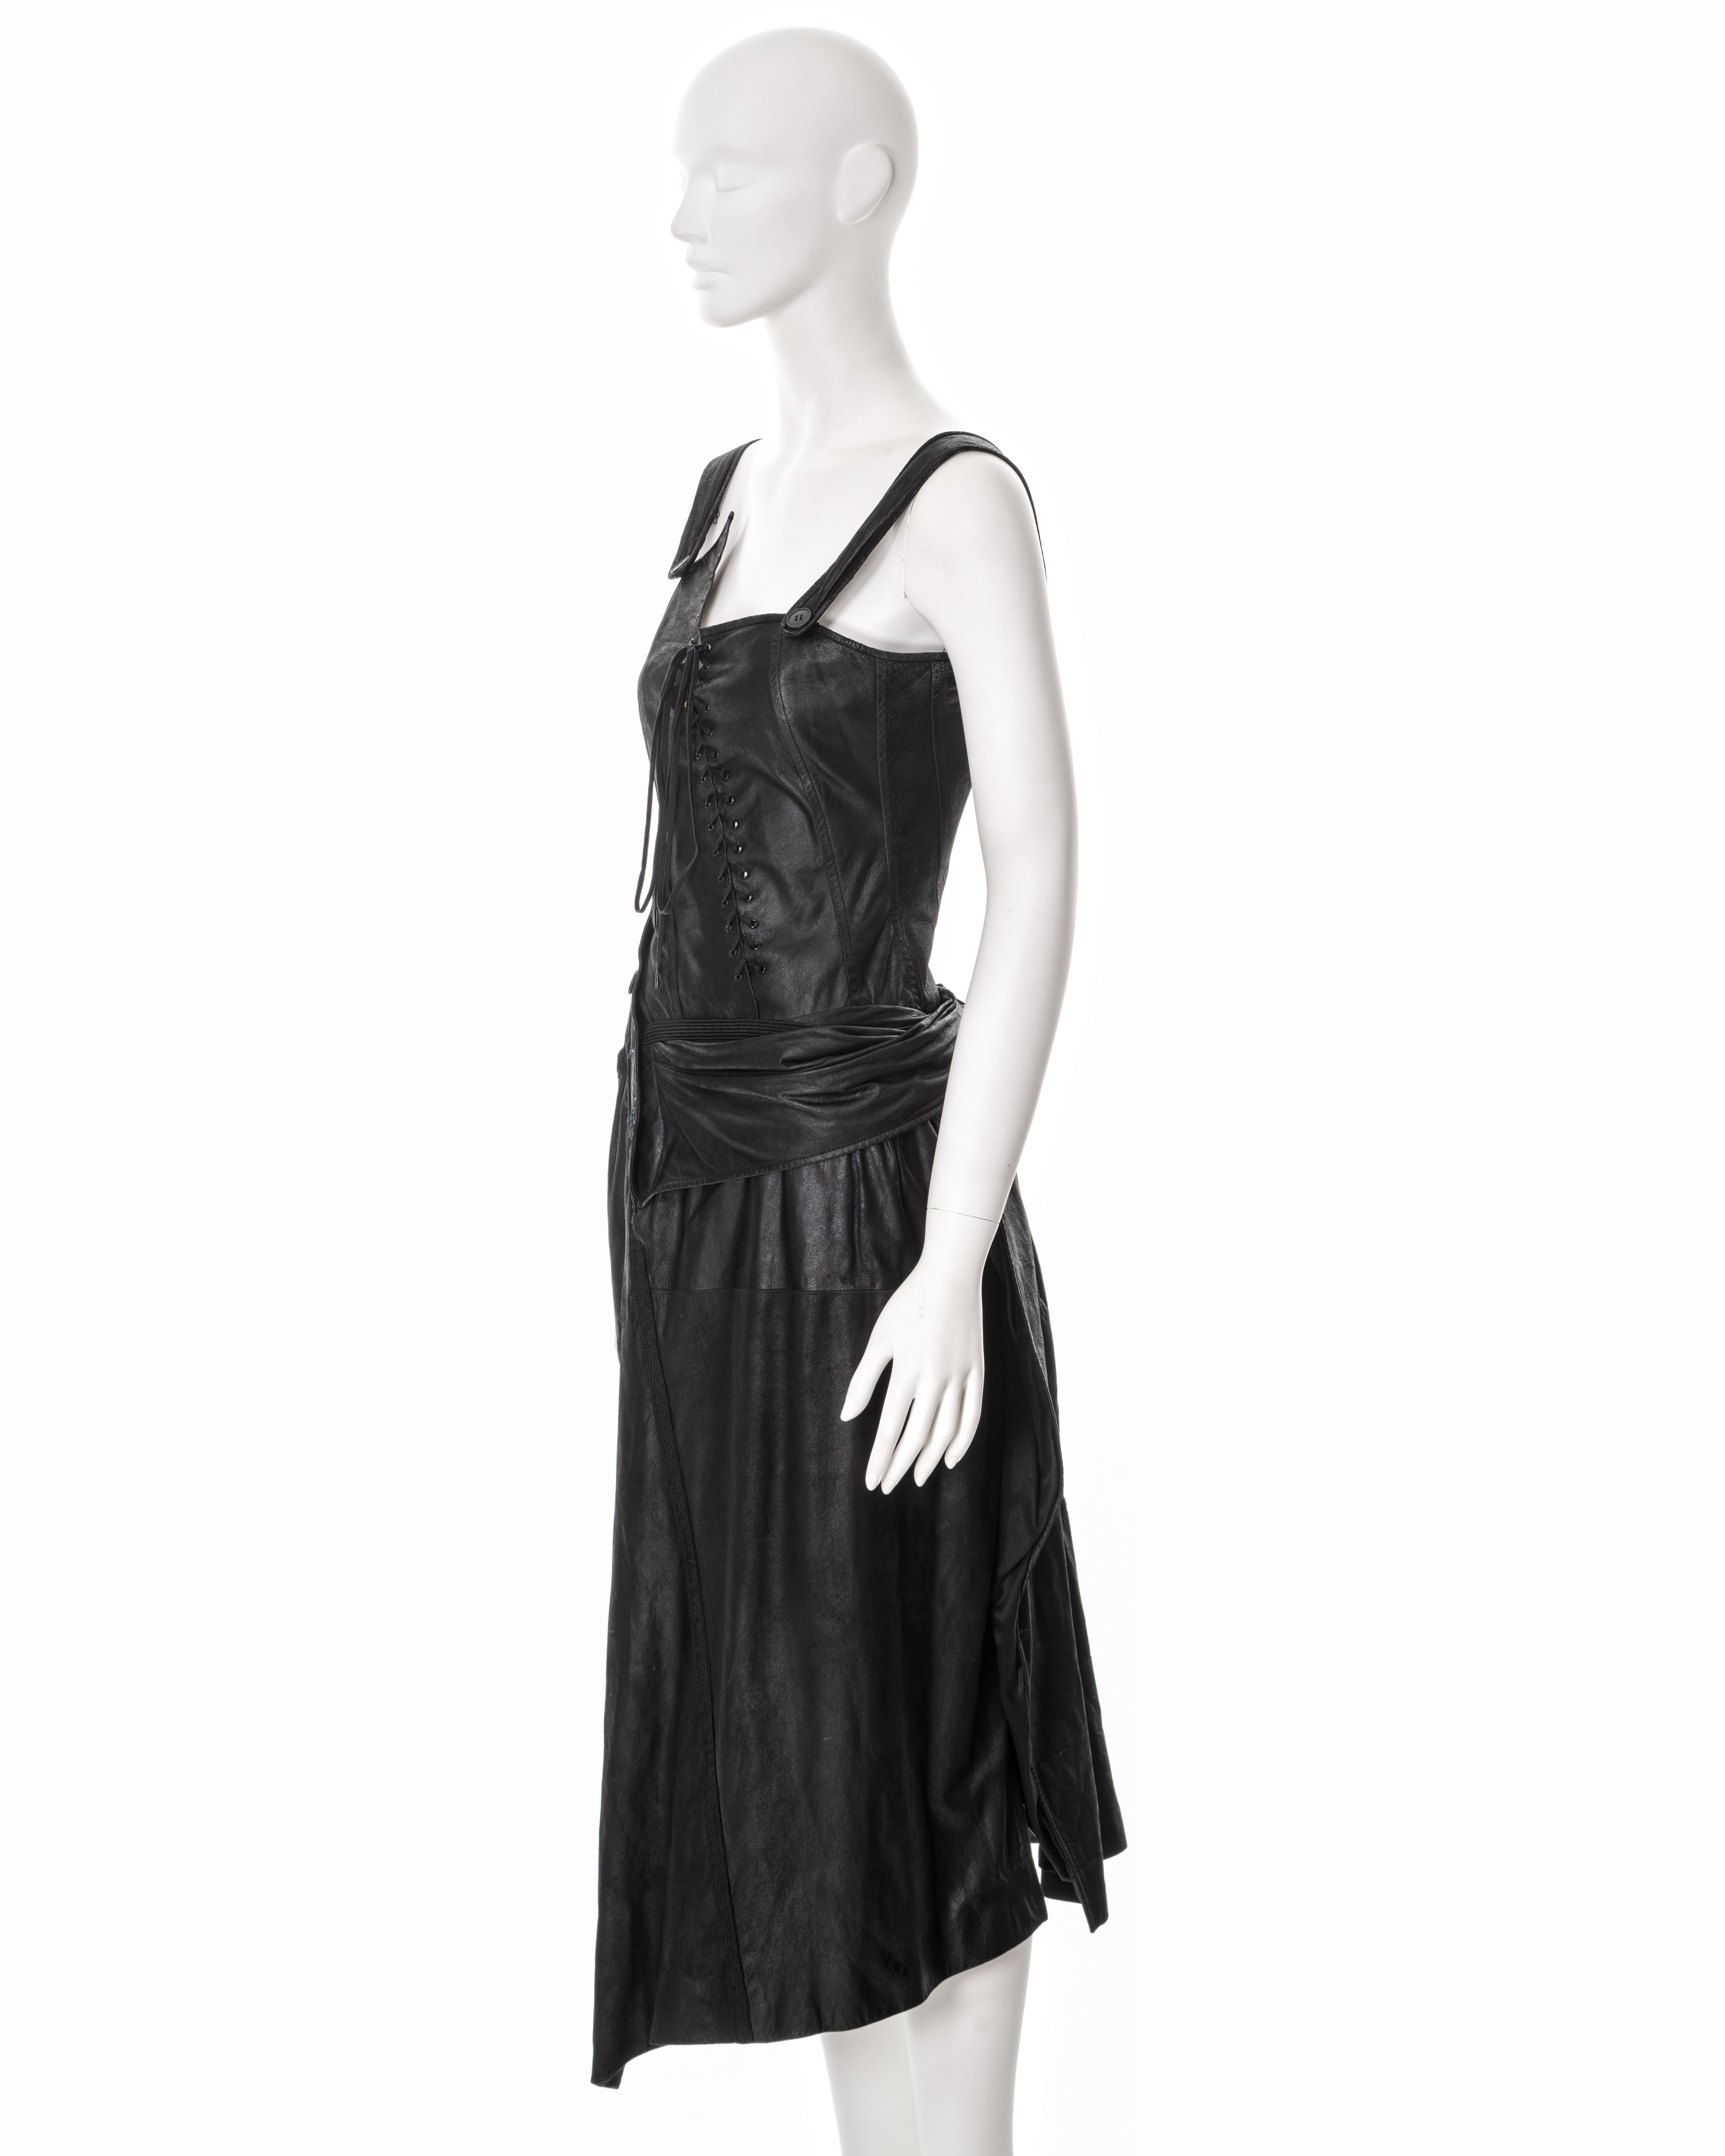 Christian Dior by John Galliano black leather deconstructed dress, ss 2000 7